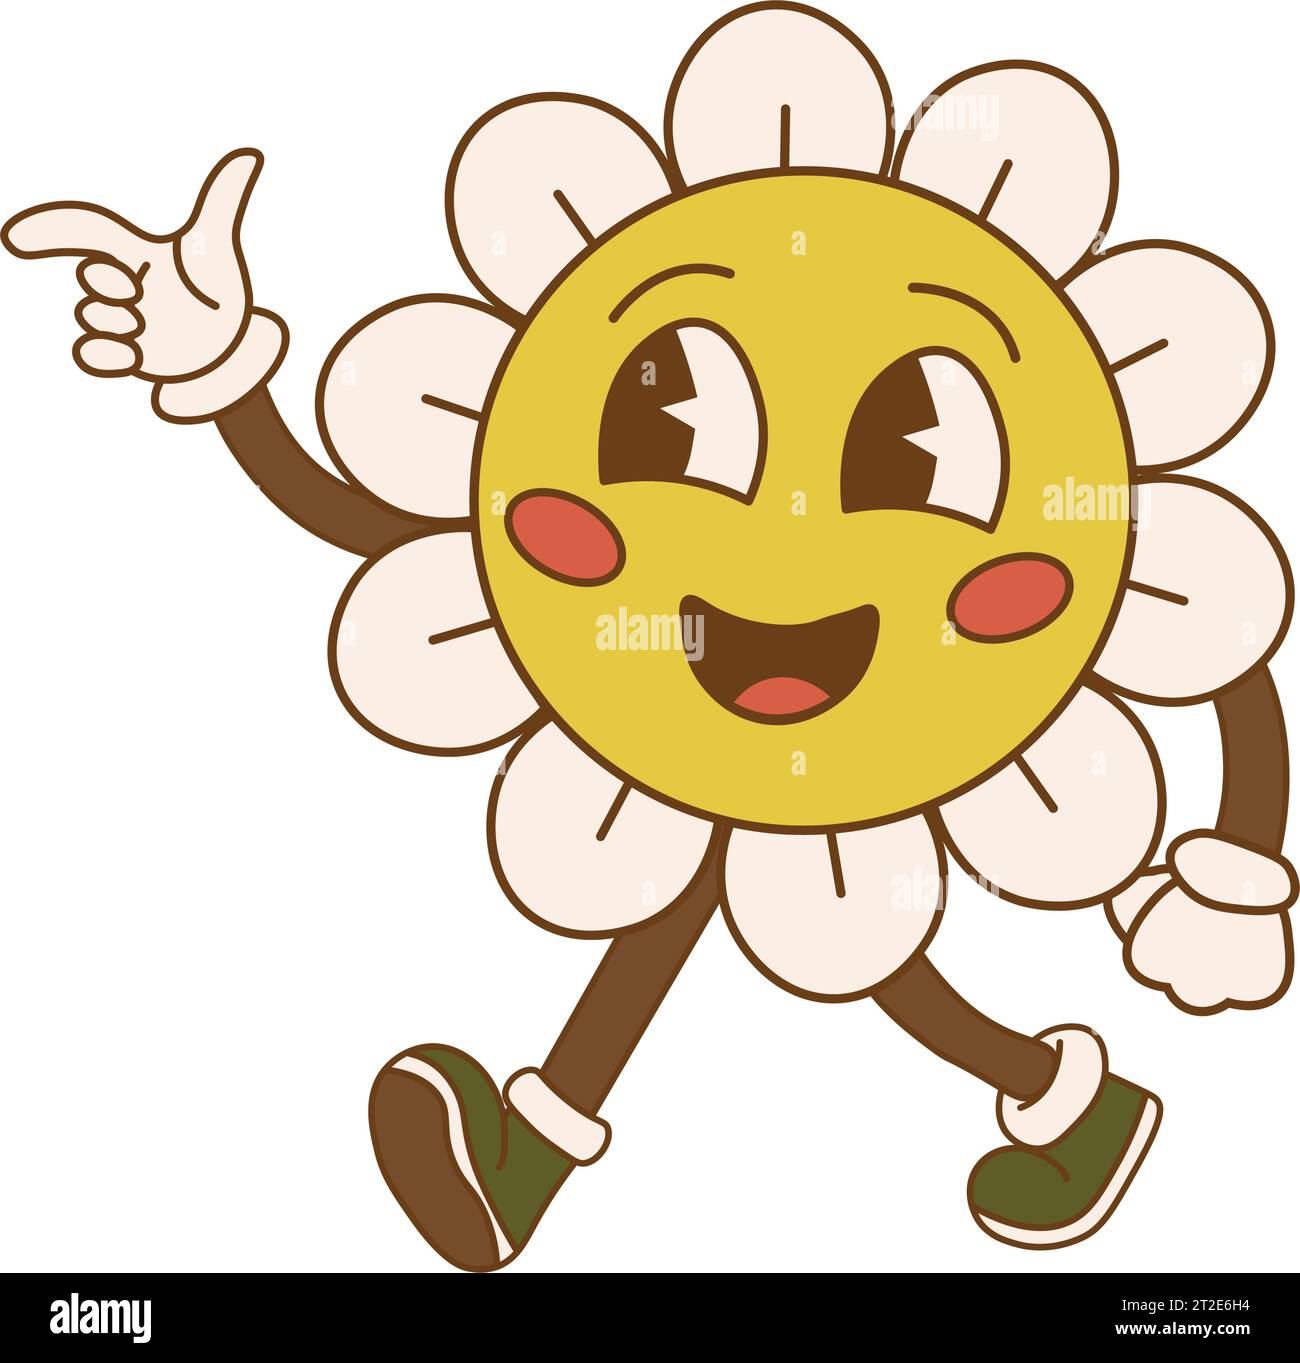 Groovy retro clipart with daisy flower. 60s, 70s, 80s cartoon style. Cute comic characters. Abstract trendy, vintage, nostalgic aesthetic background. Stock Vector